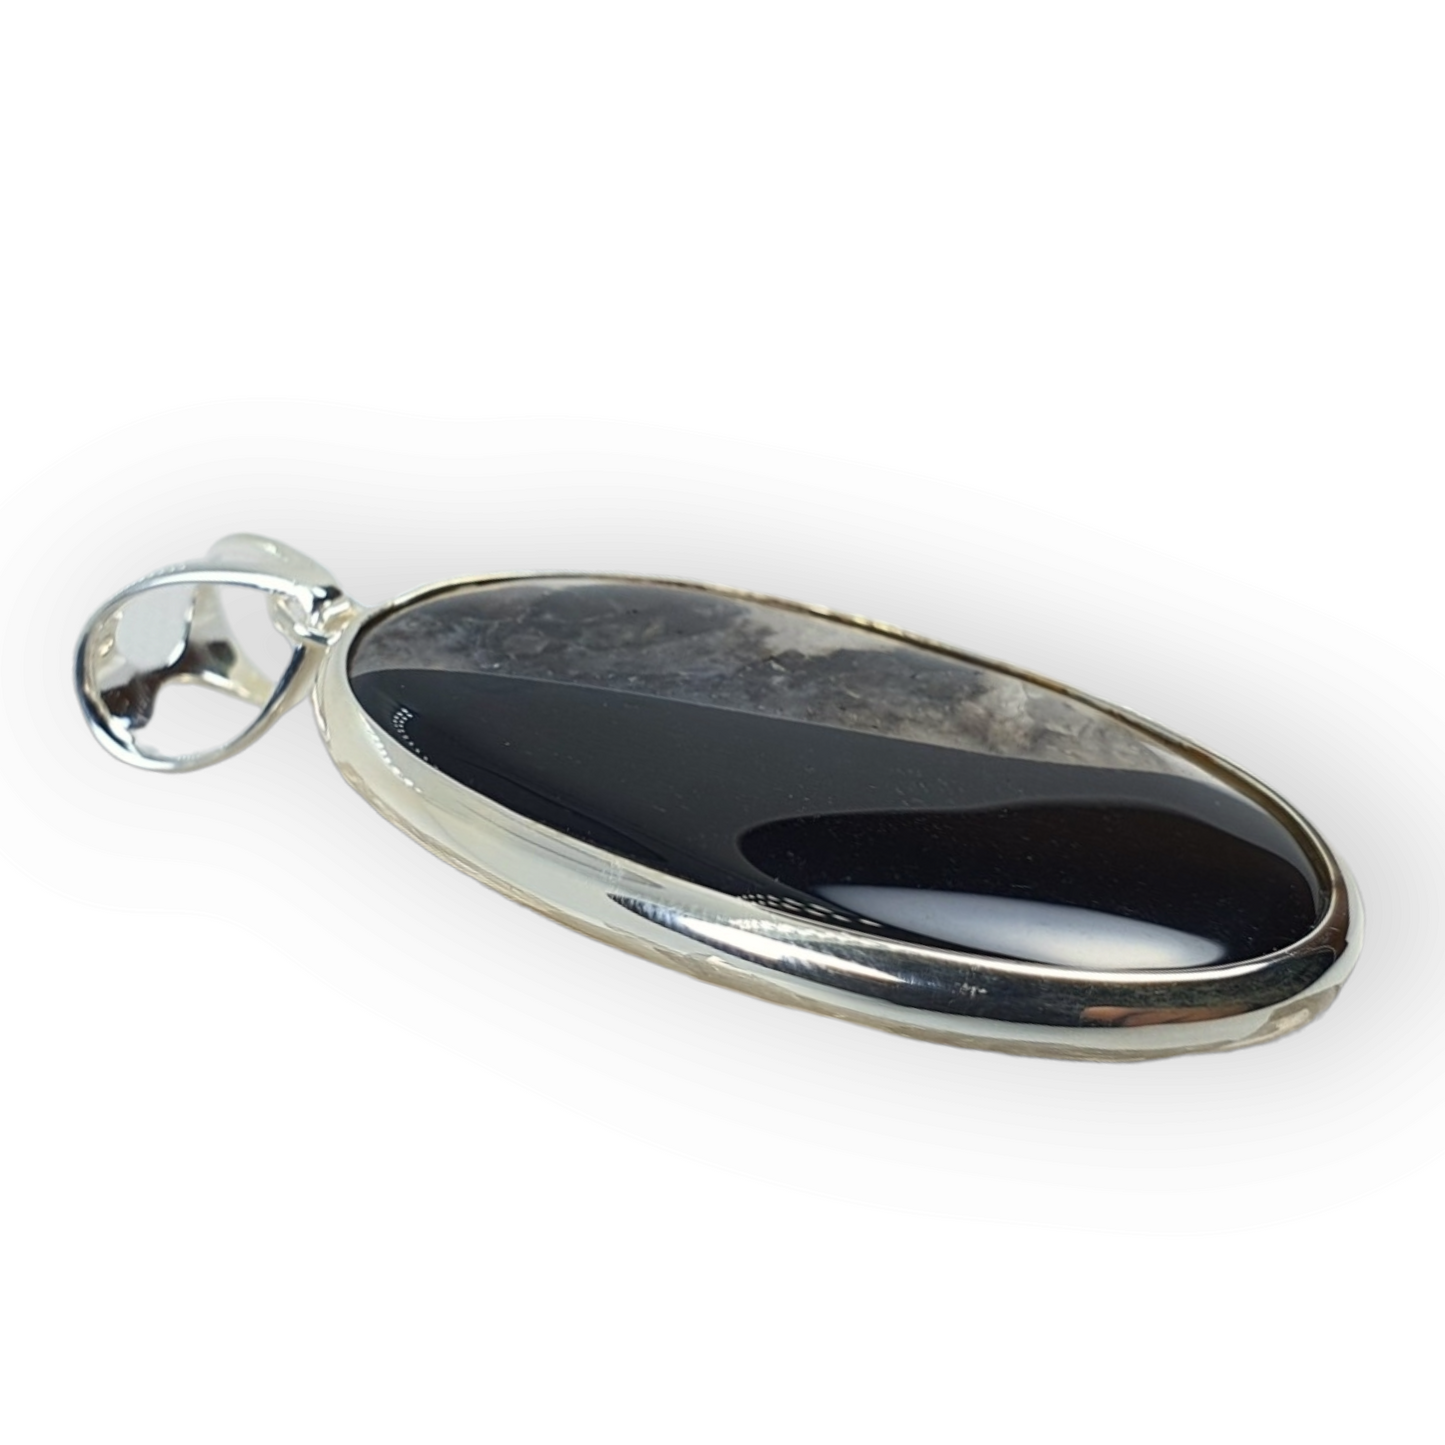 Crystals - Banded Onyx Oval Cabochon Pendant - Sterling Silver